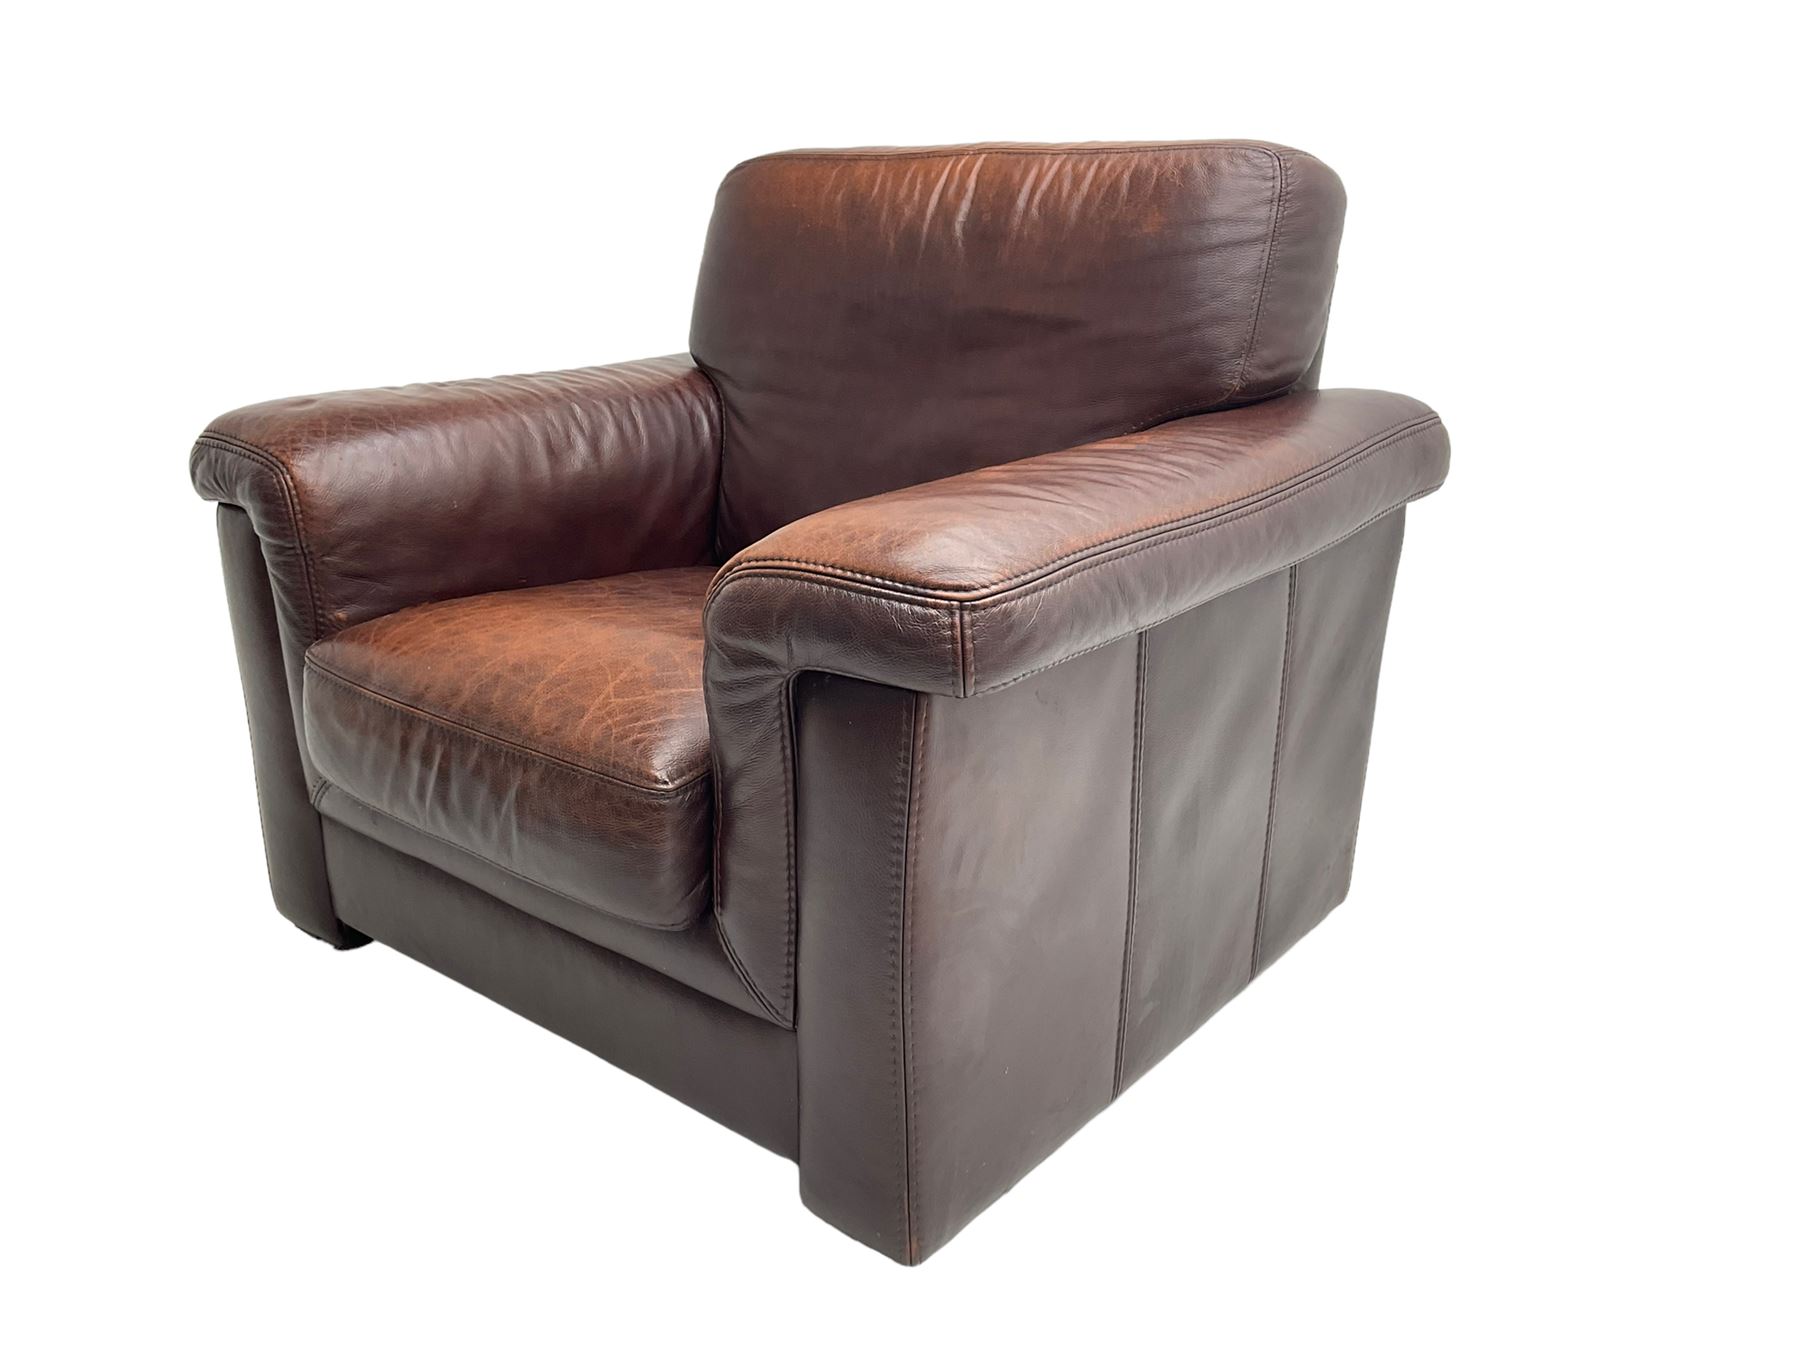 Large armchair upholstered in chocolate brown leather - Image 3 of 6